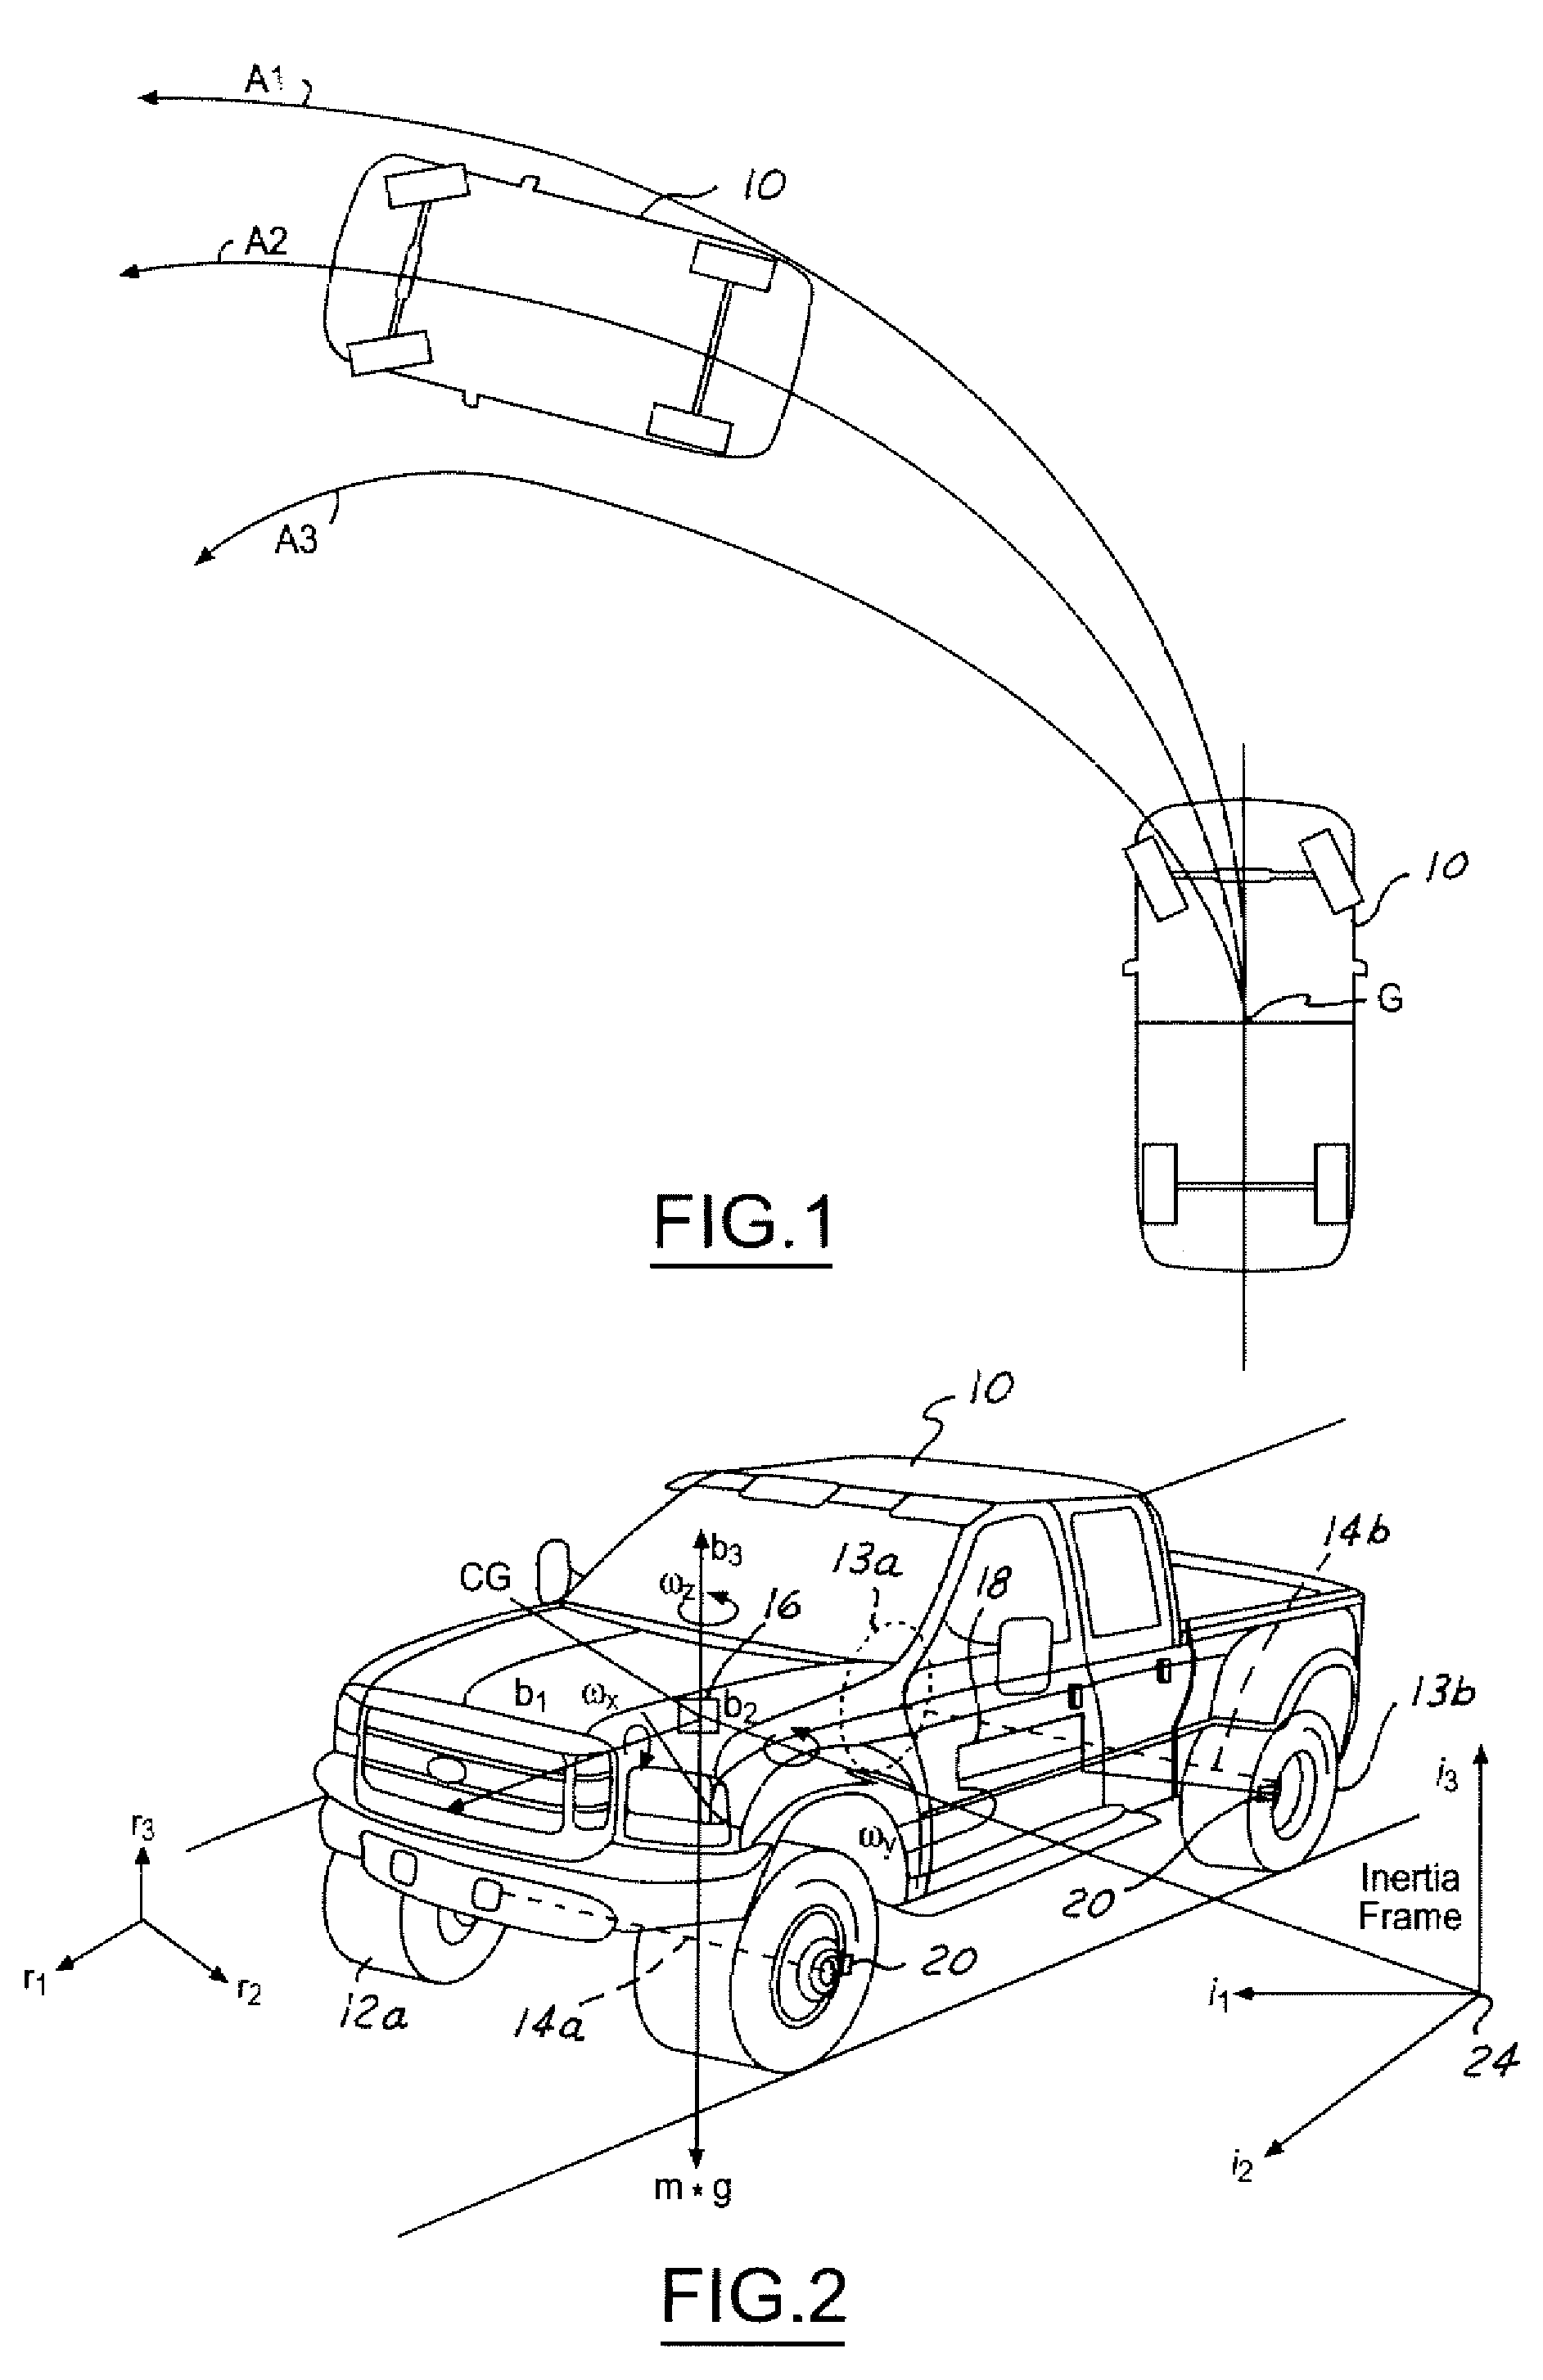 Method and apparatus of controlling an automotive vehicle using brake-steer as a function of steering wheel torque